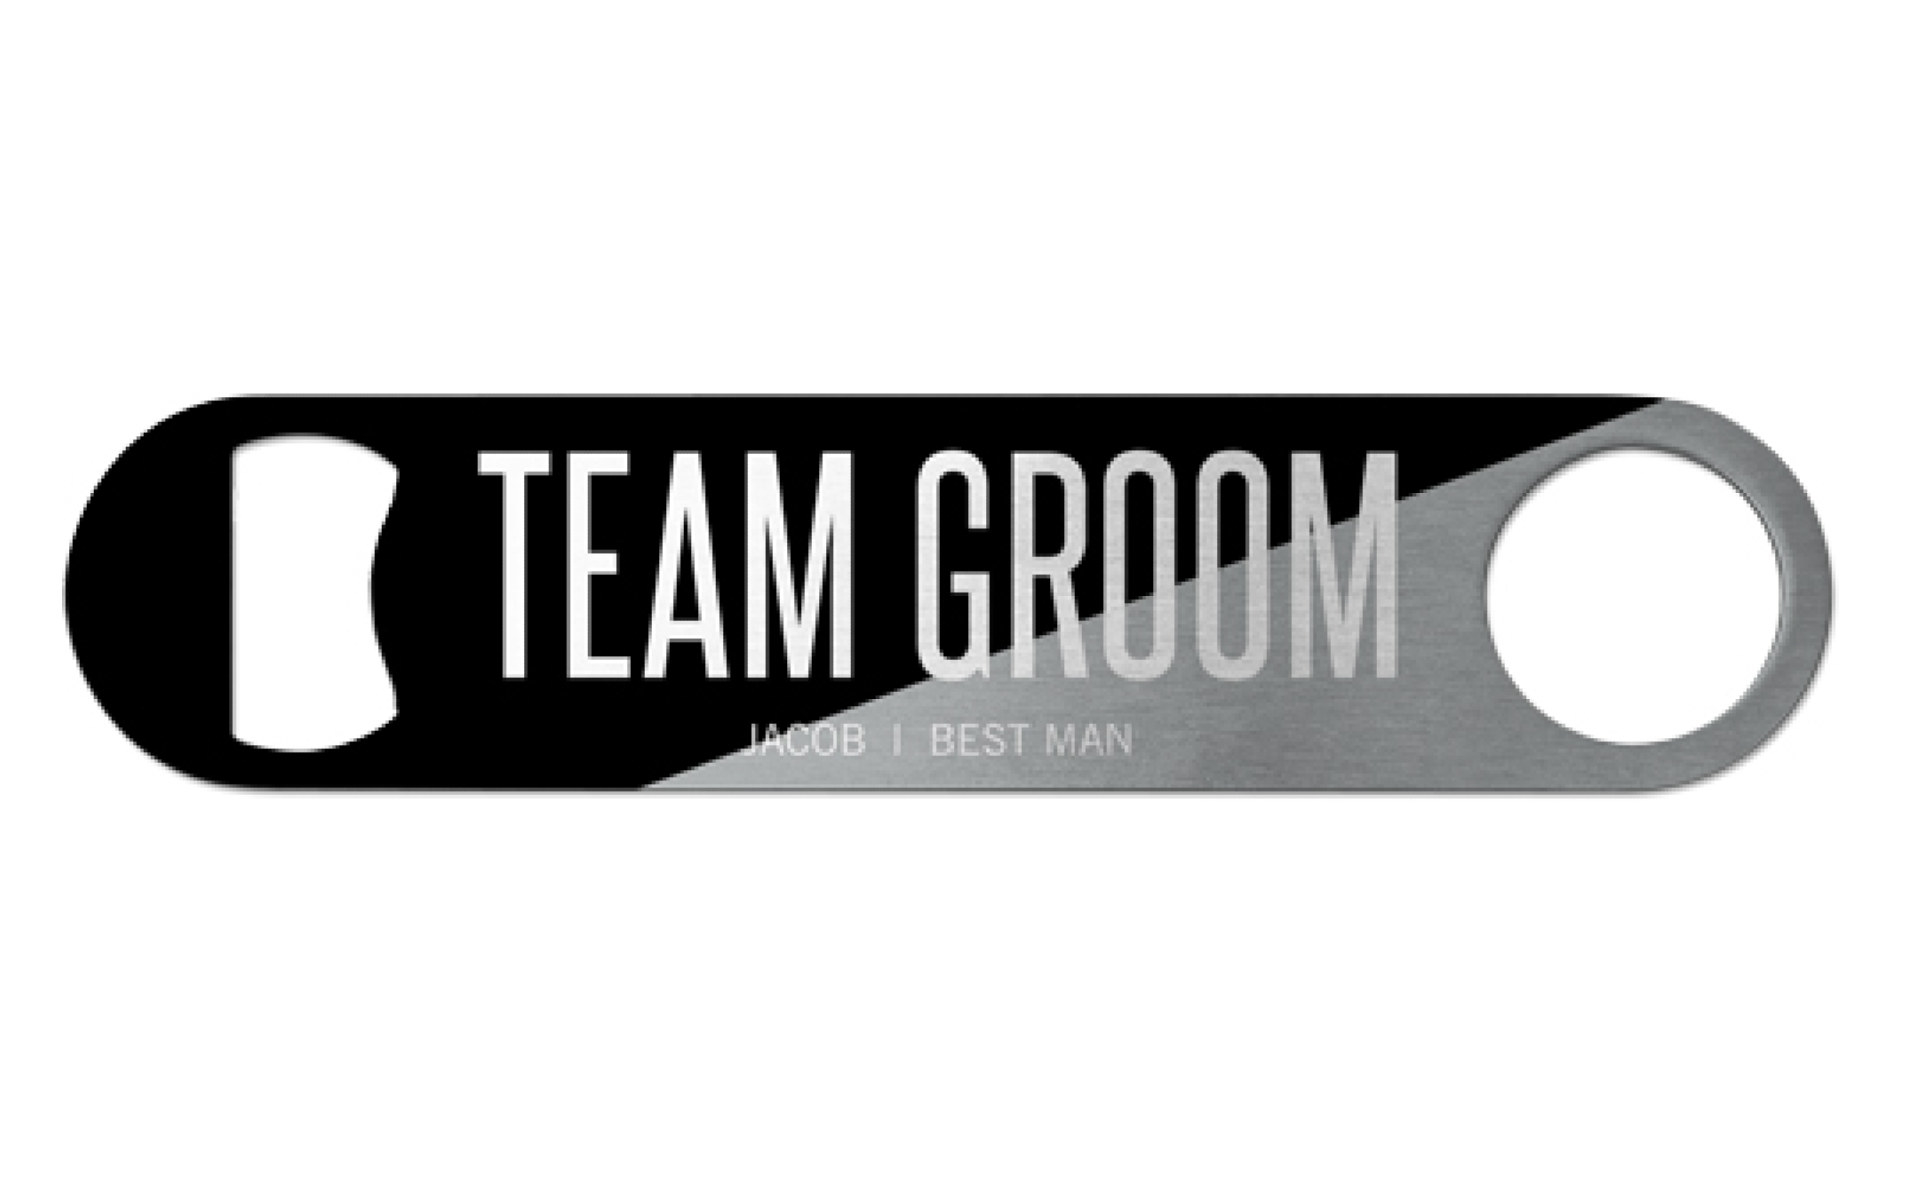 Bottle opener with team groom, best man, and name of best man written on it